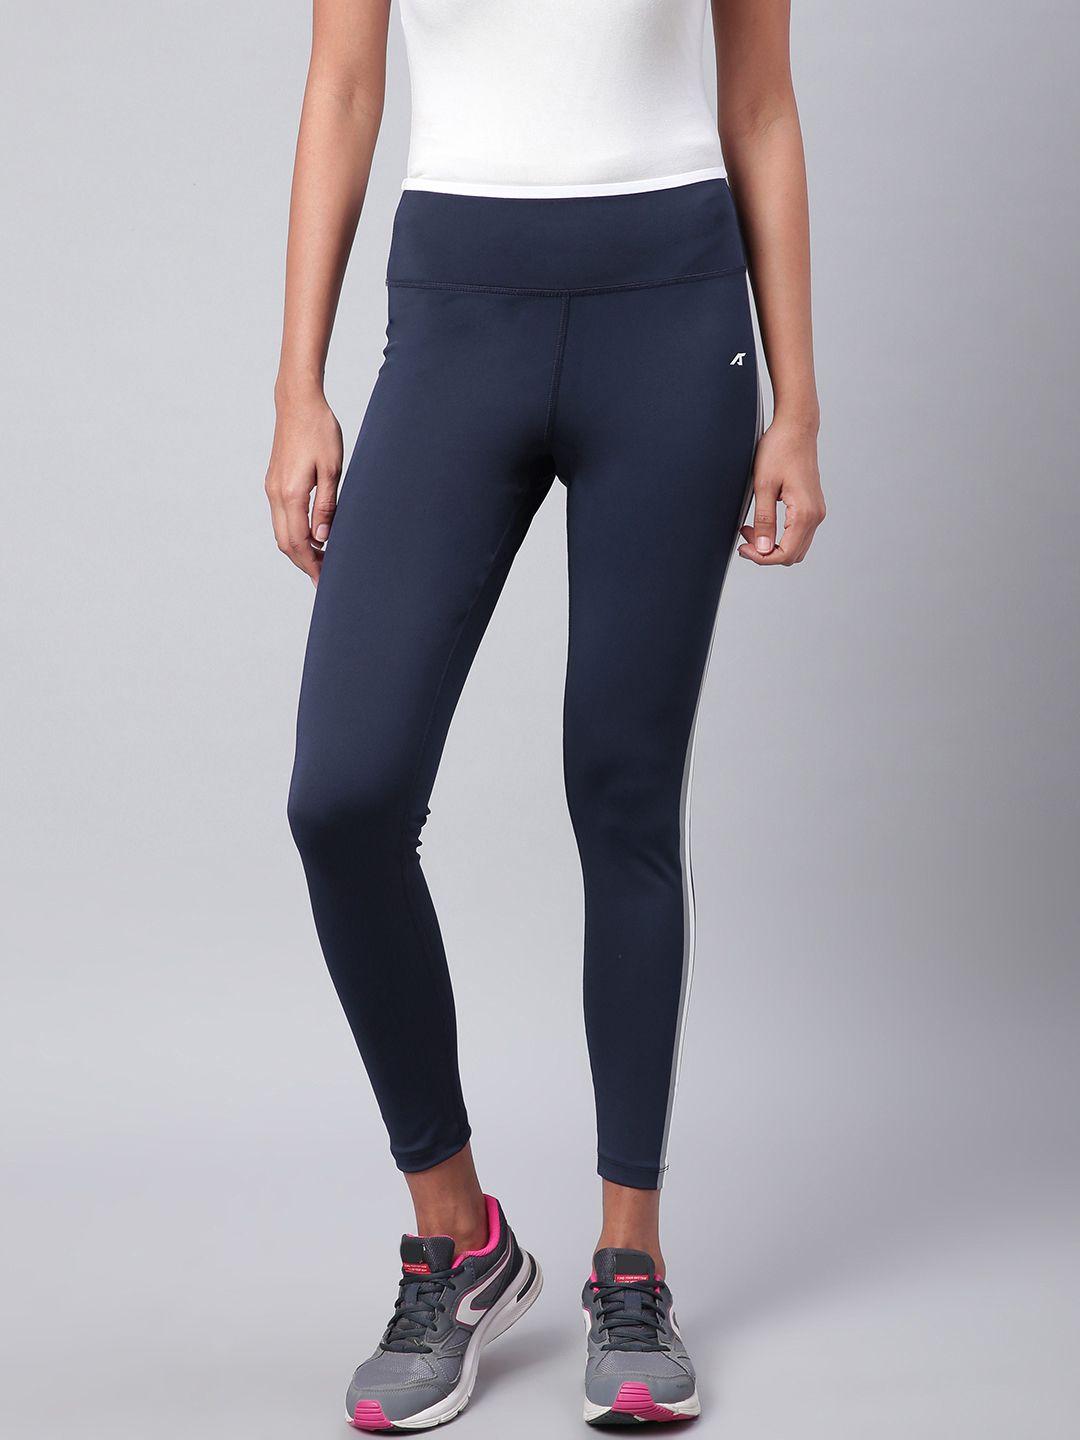 alcis-women-navy-blue-solid-secure-fit-cropped-training-tights